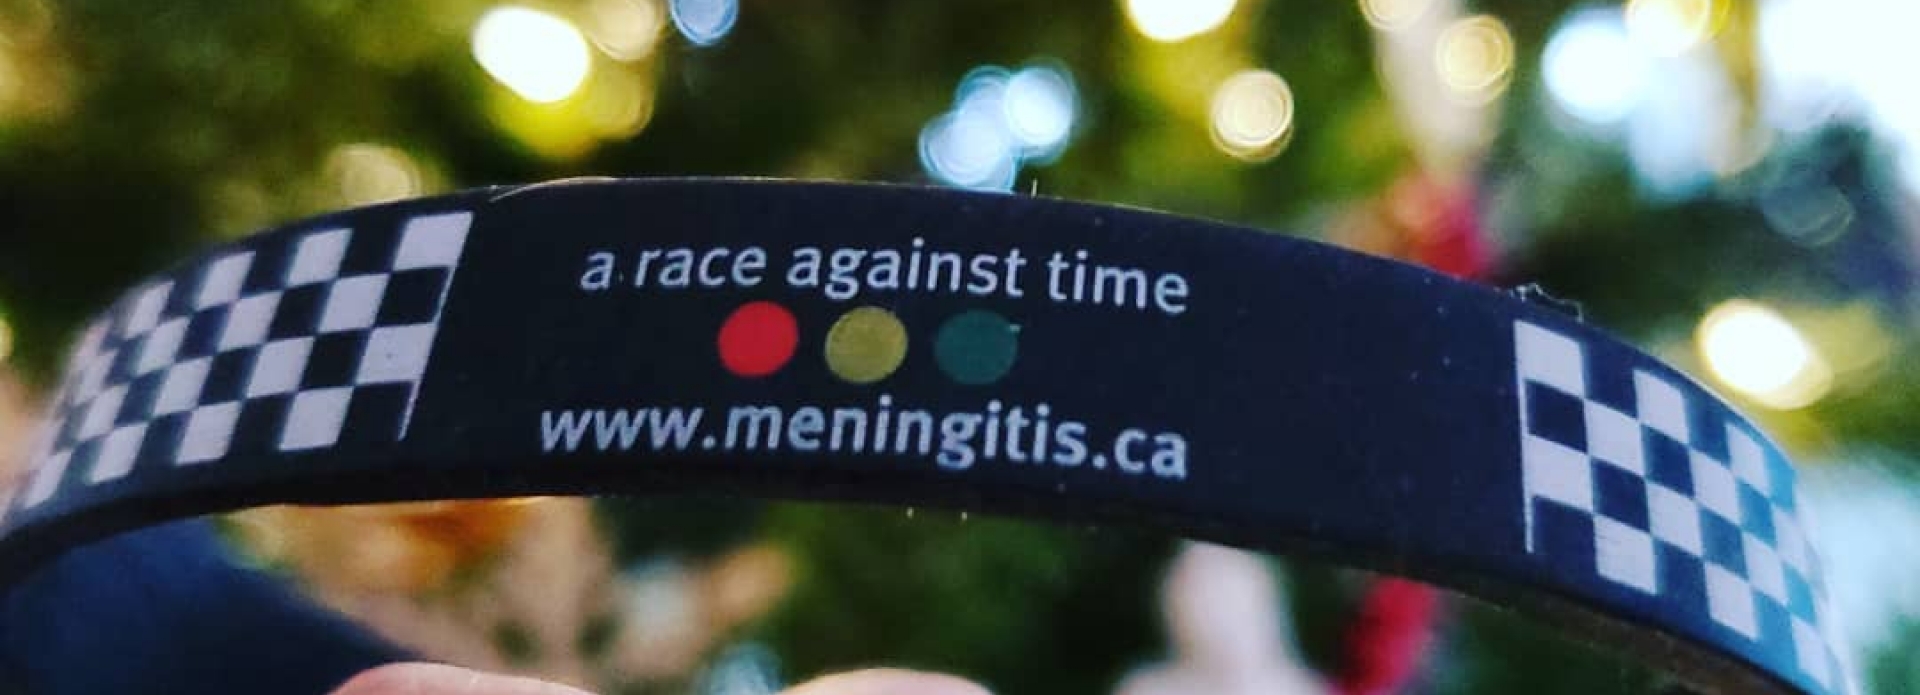 Hand holding a wristband that says " a race against time, www.meningitis.ca".